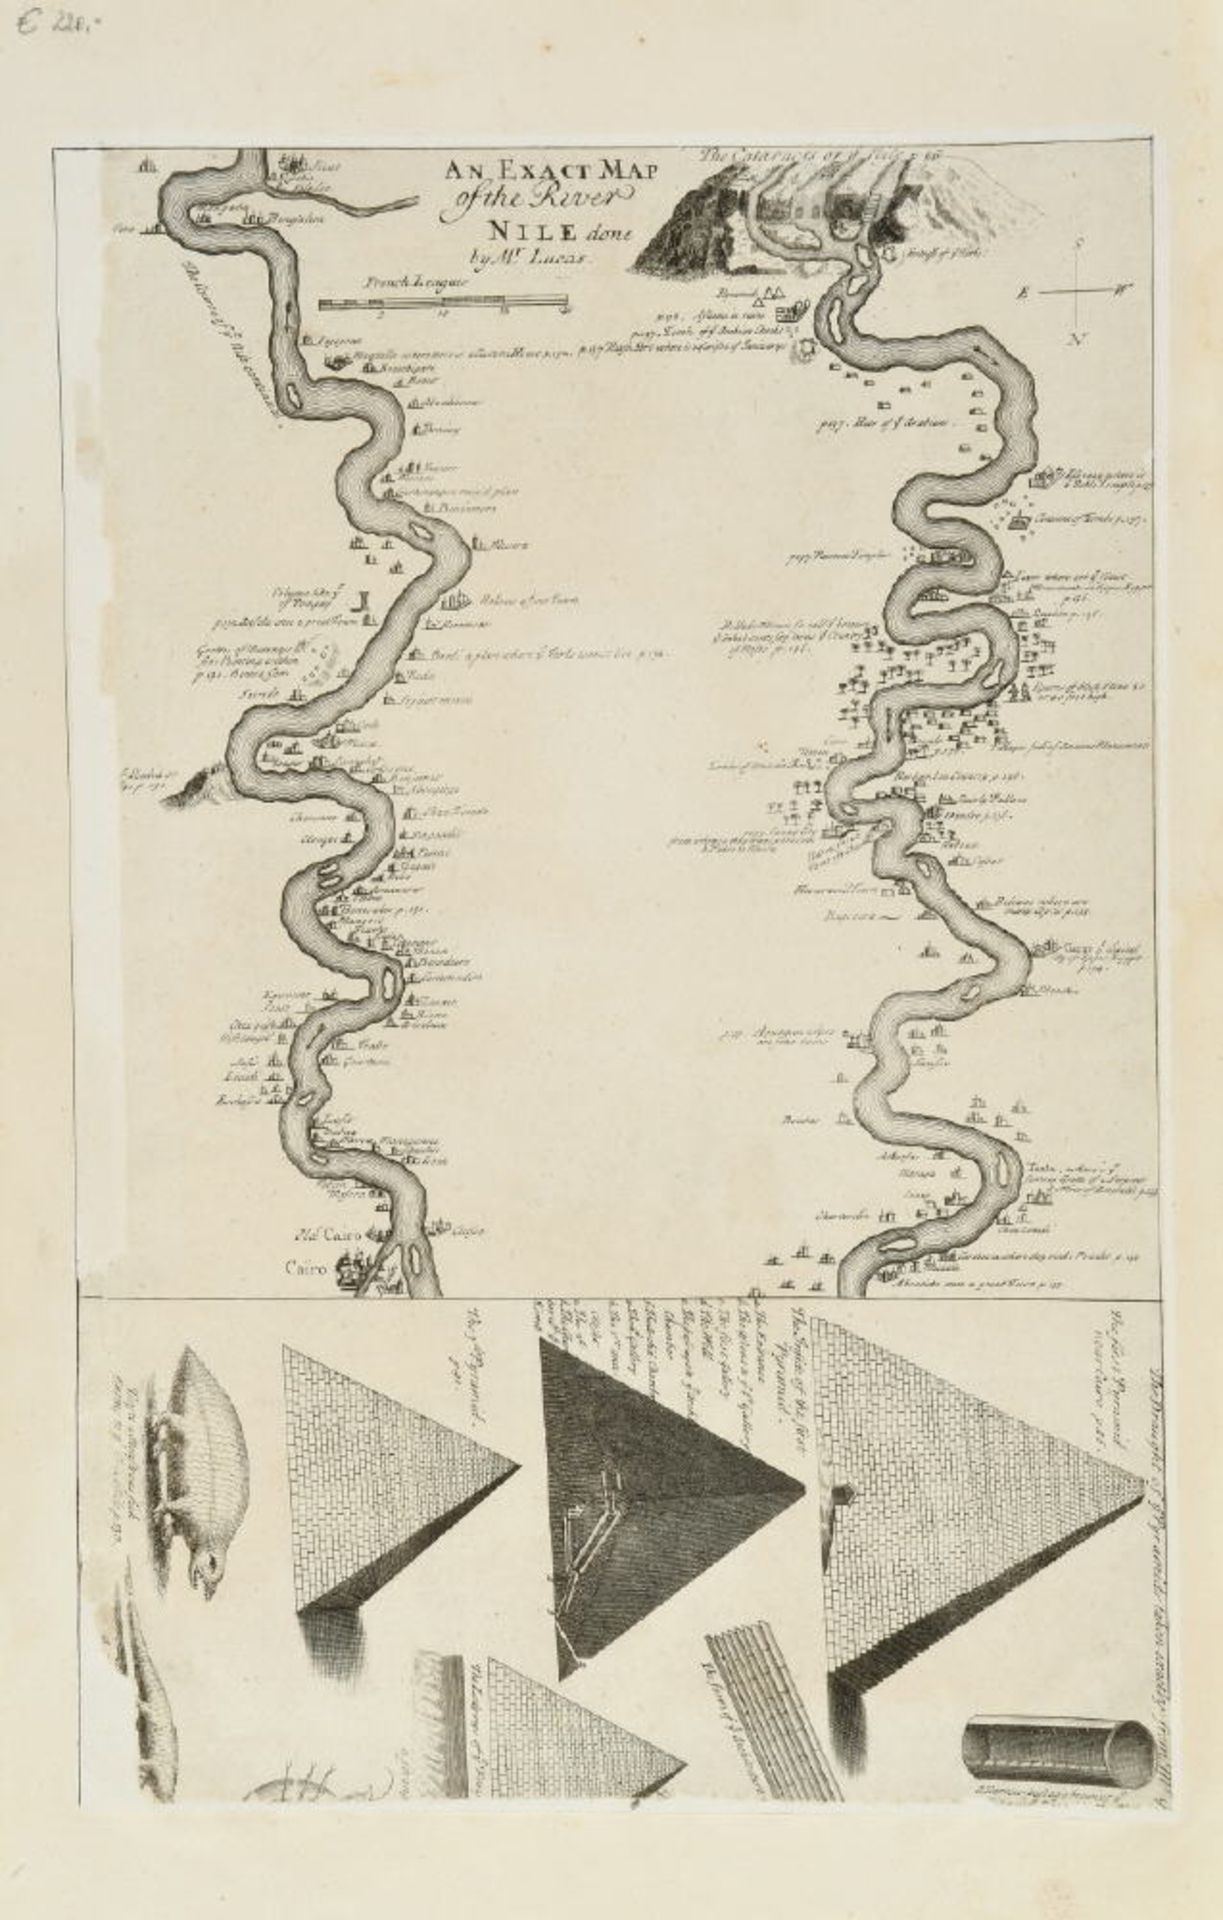 Landkarte "An exact Map of the River Nile"